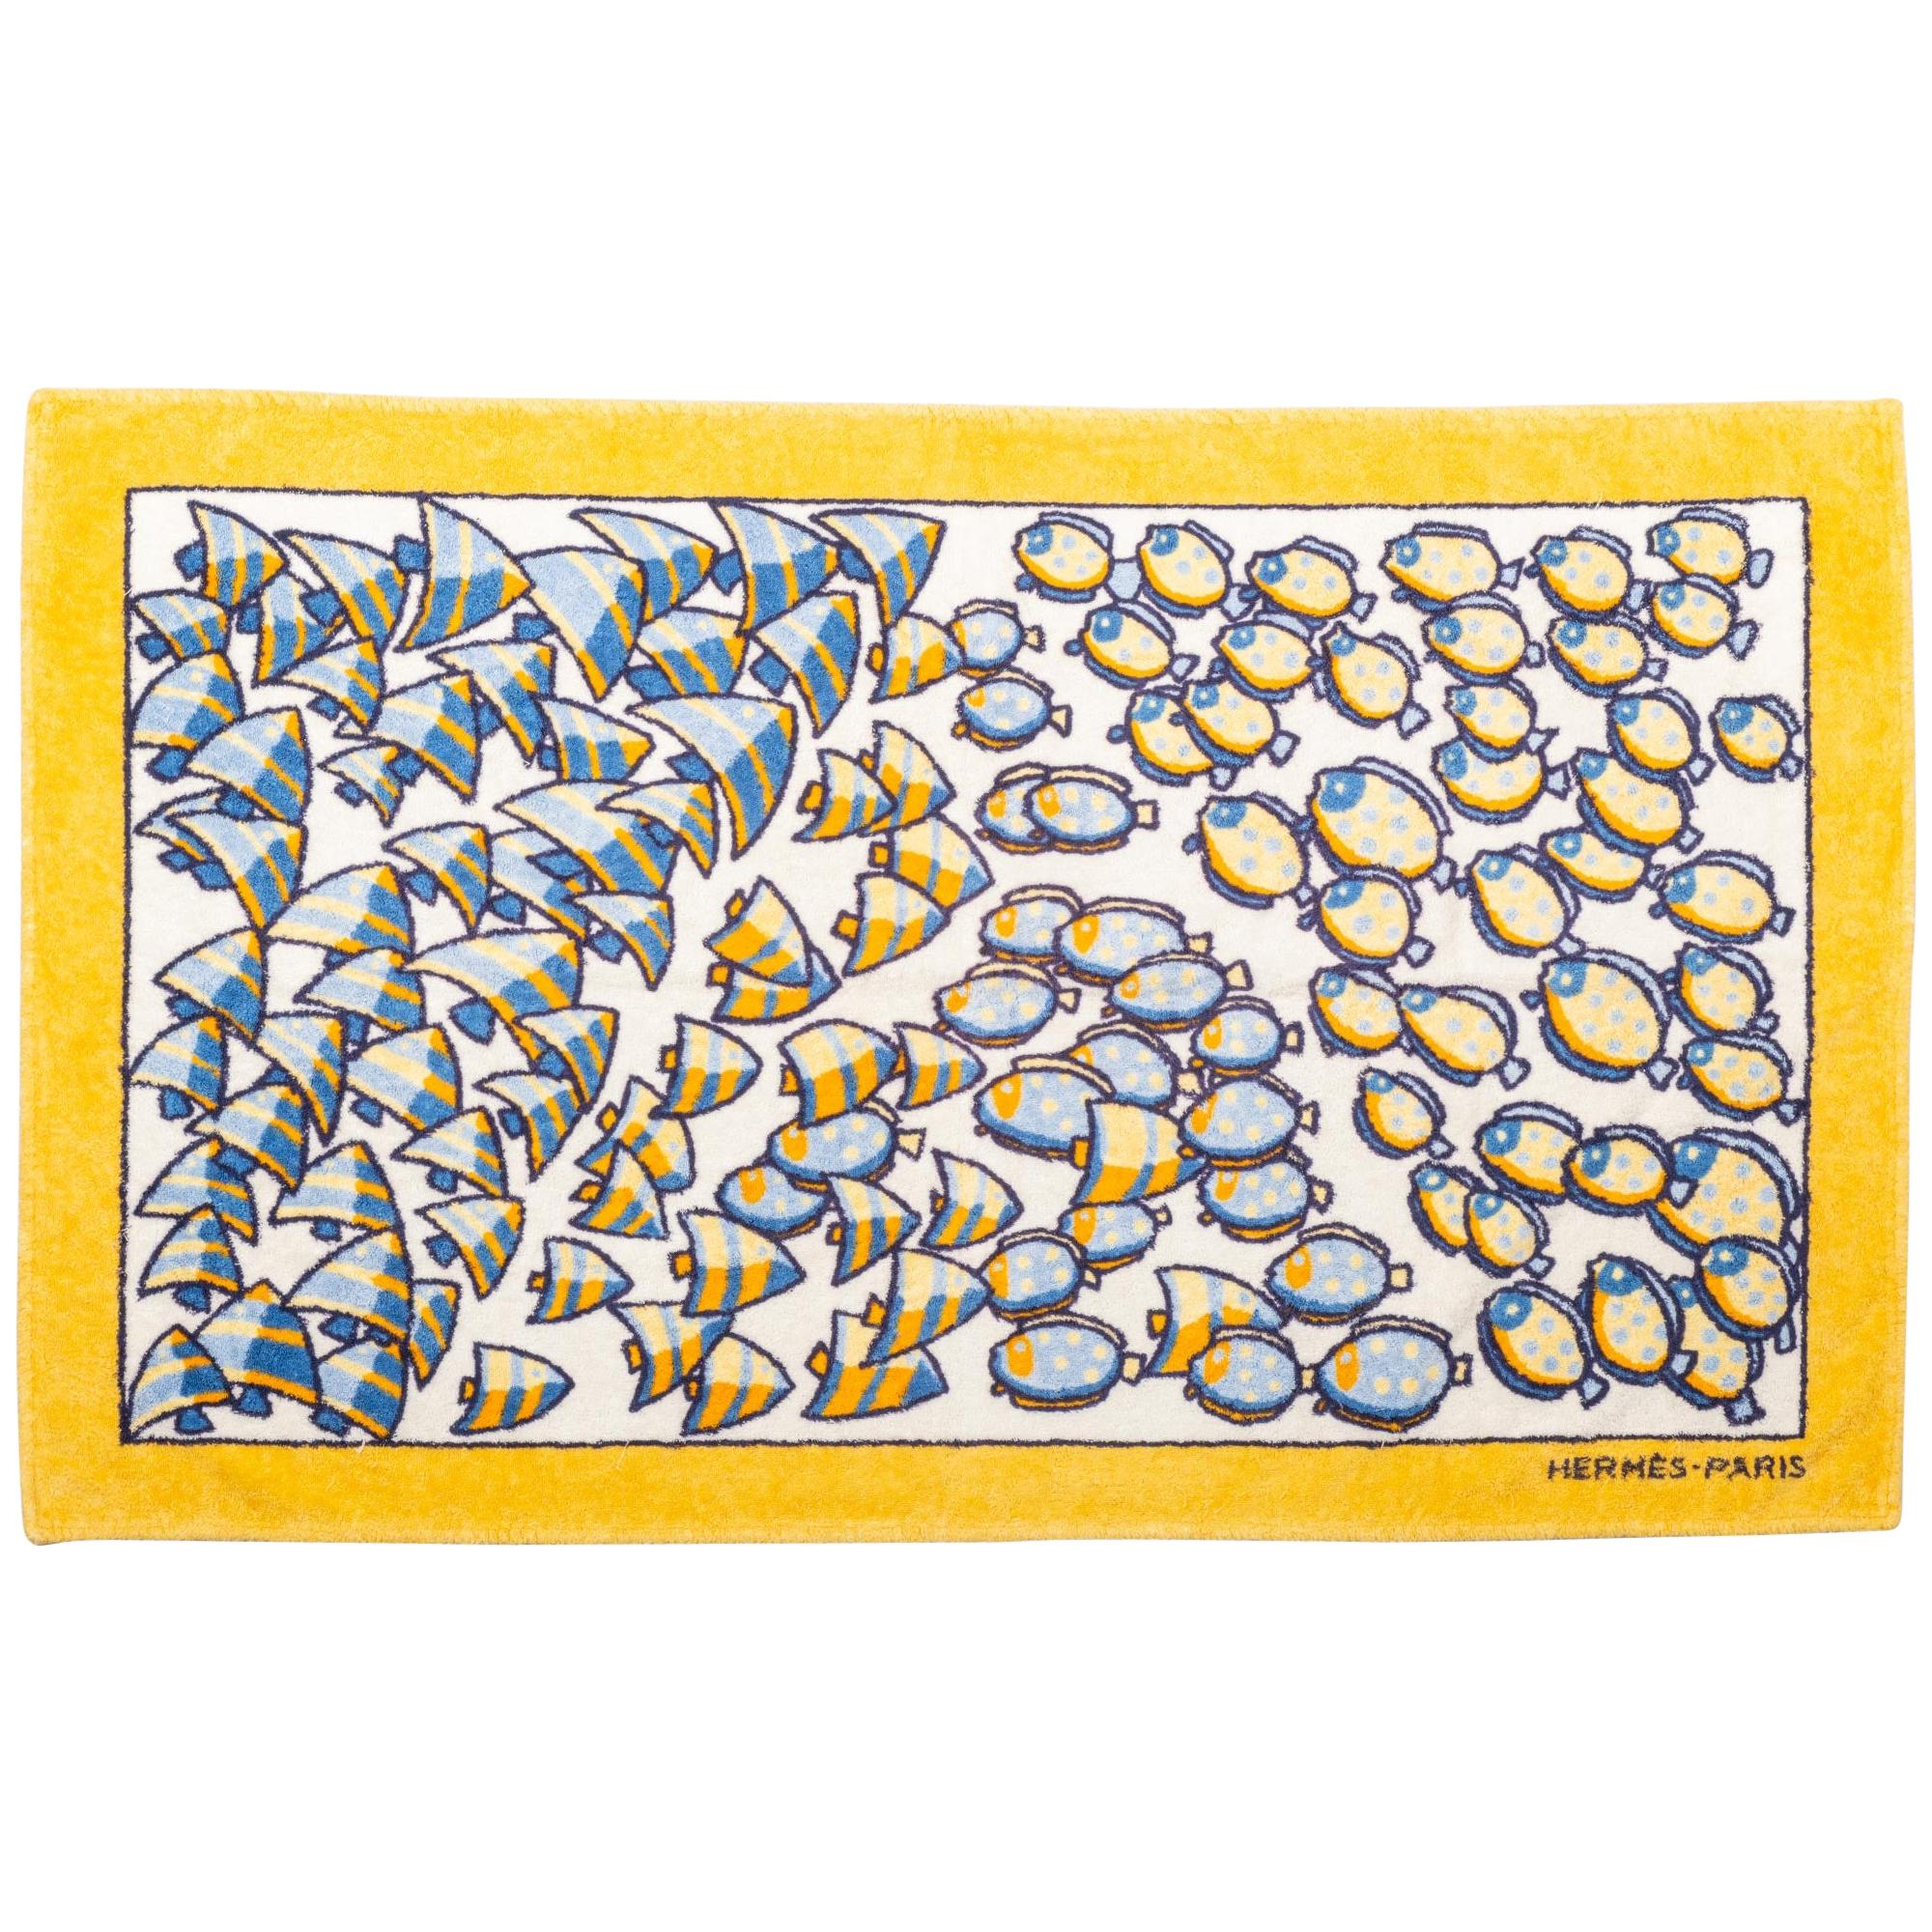 1990's Collectible Hermes Yellow Fish Cotton Beach Towel